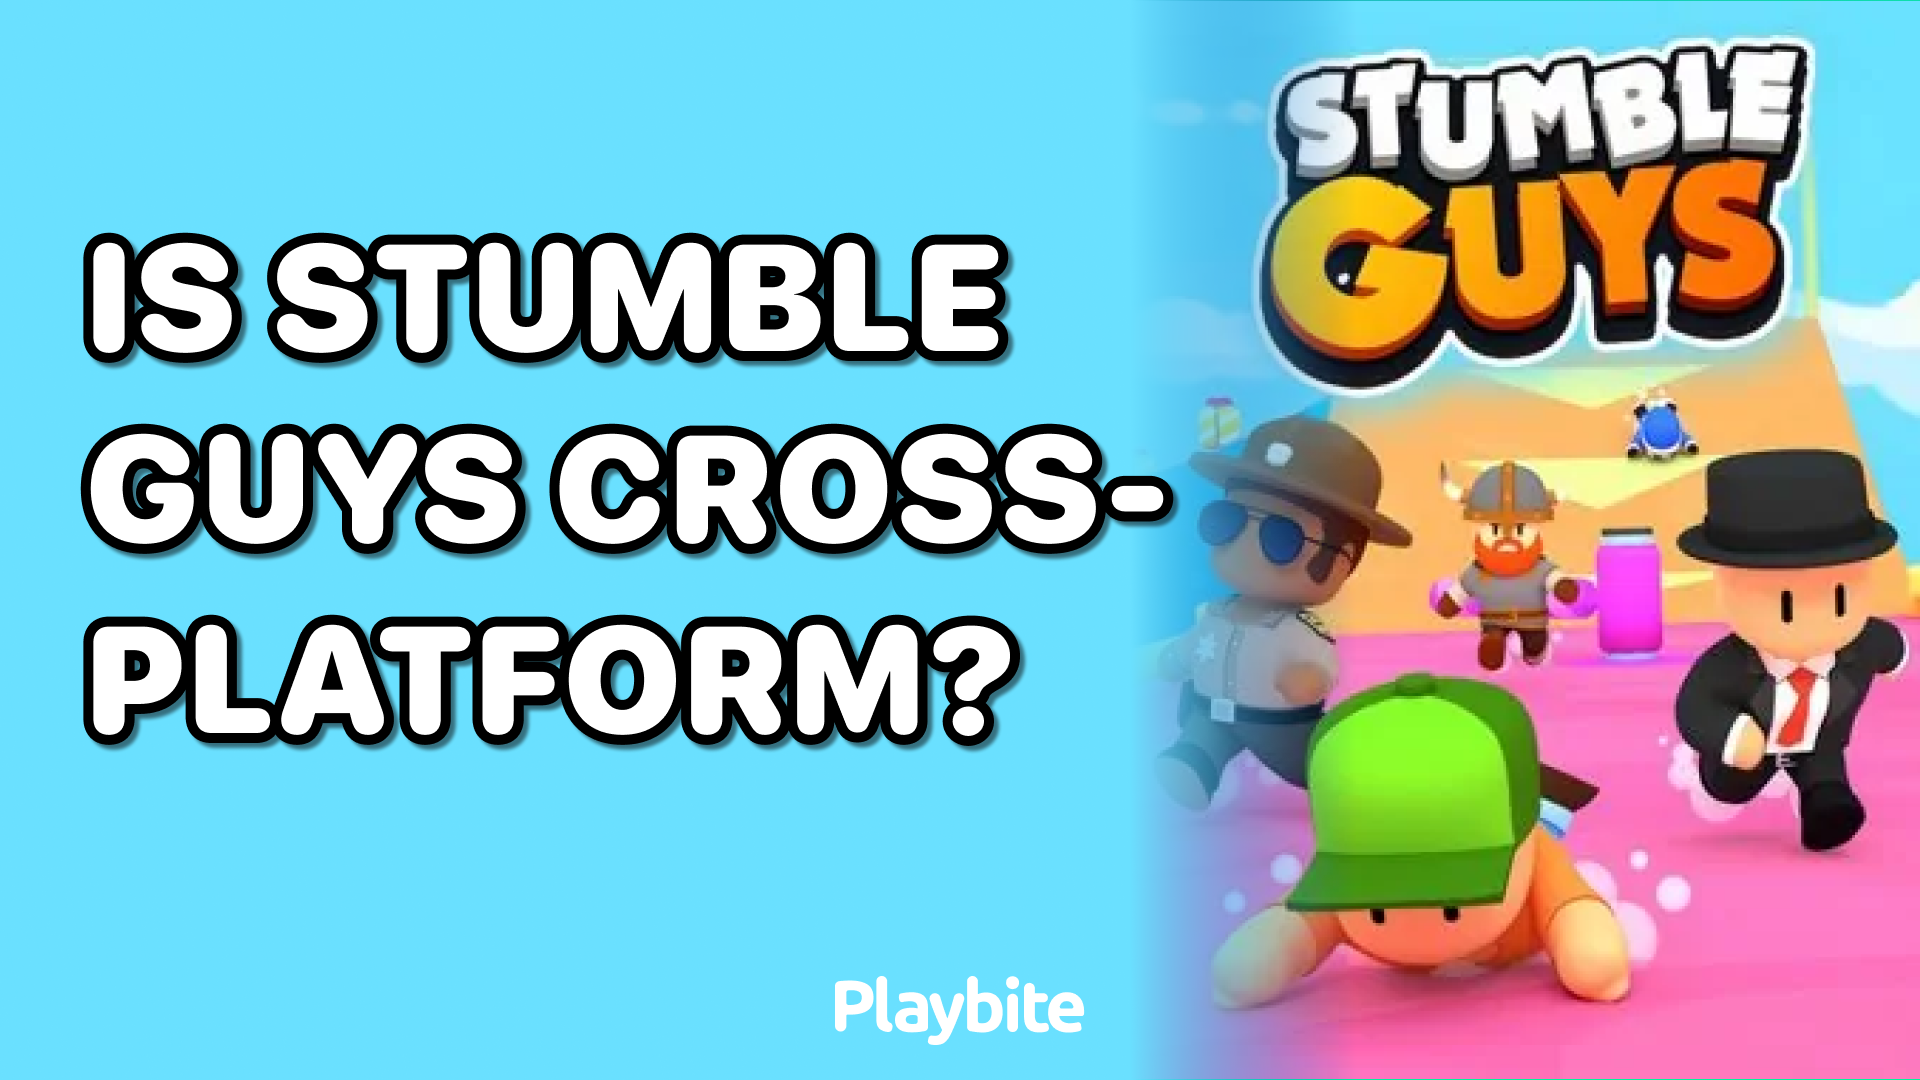 Is Stumble Guys Cross-Platform? Find Out Here!